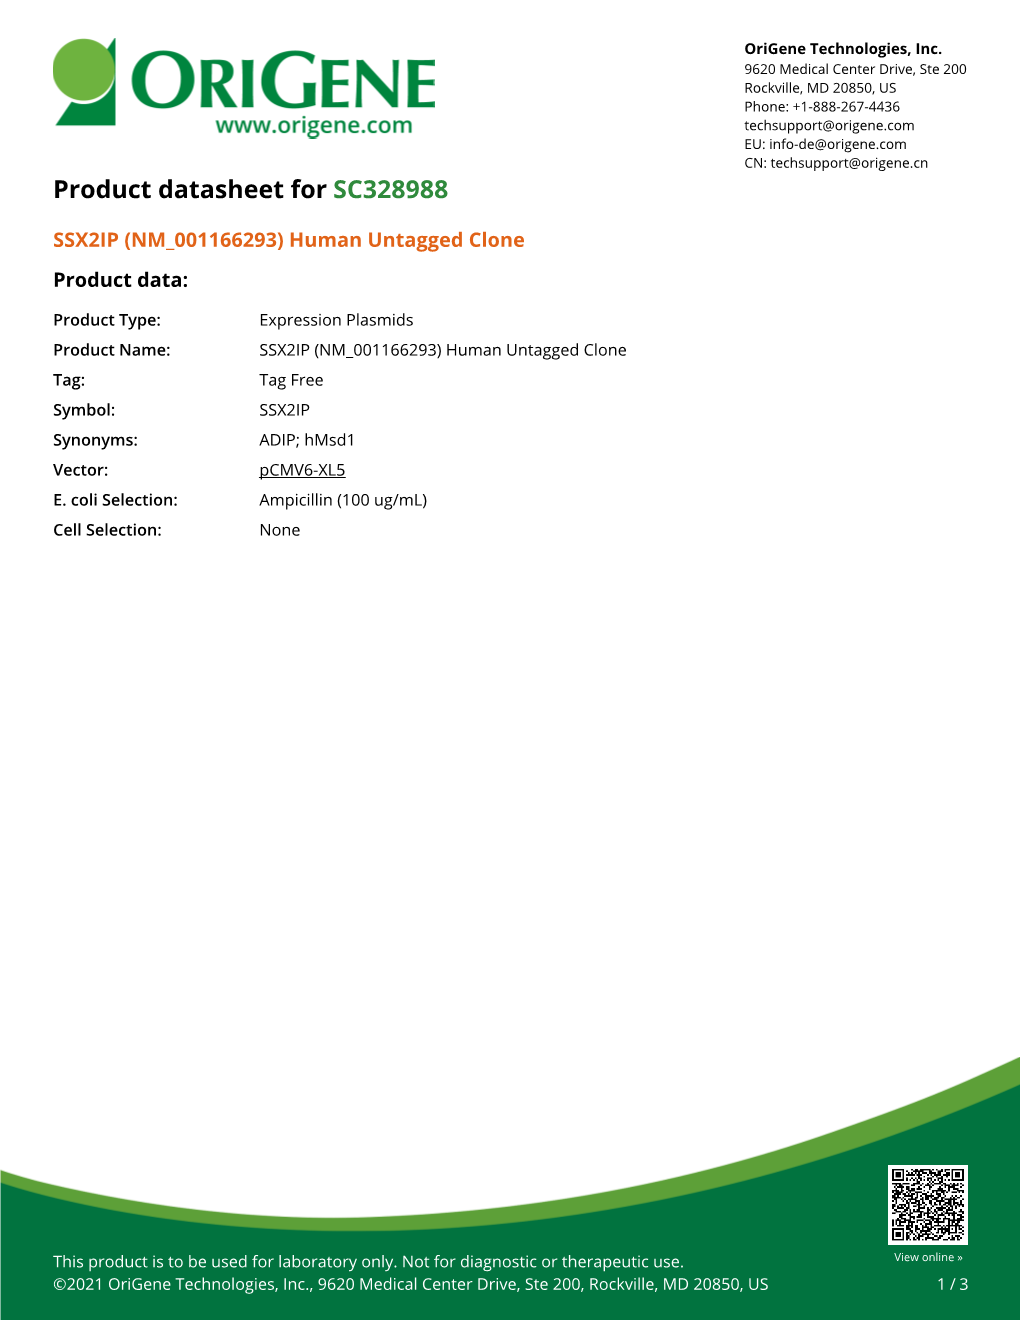 SSX2IP (NM 001166293) Human Untagged Clone Product Data